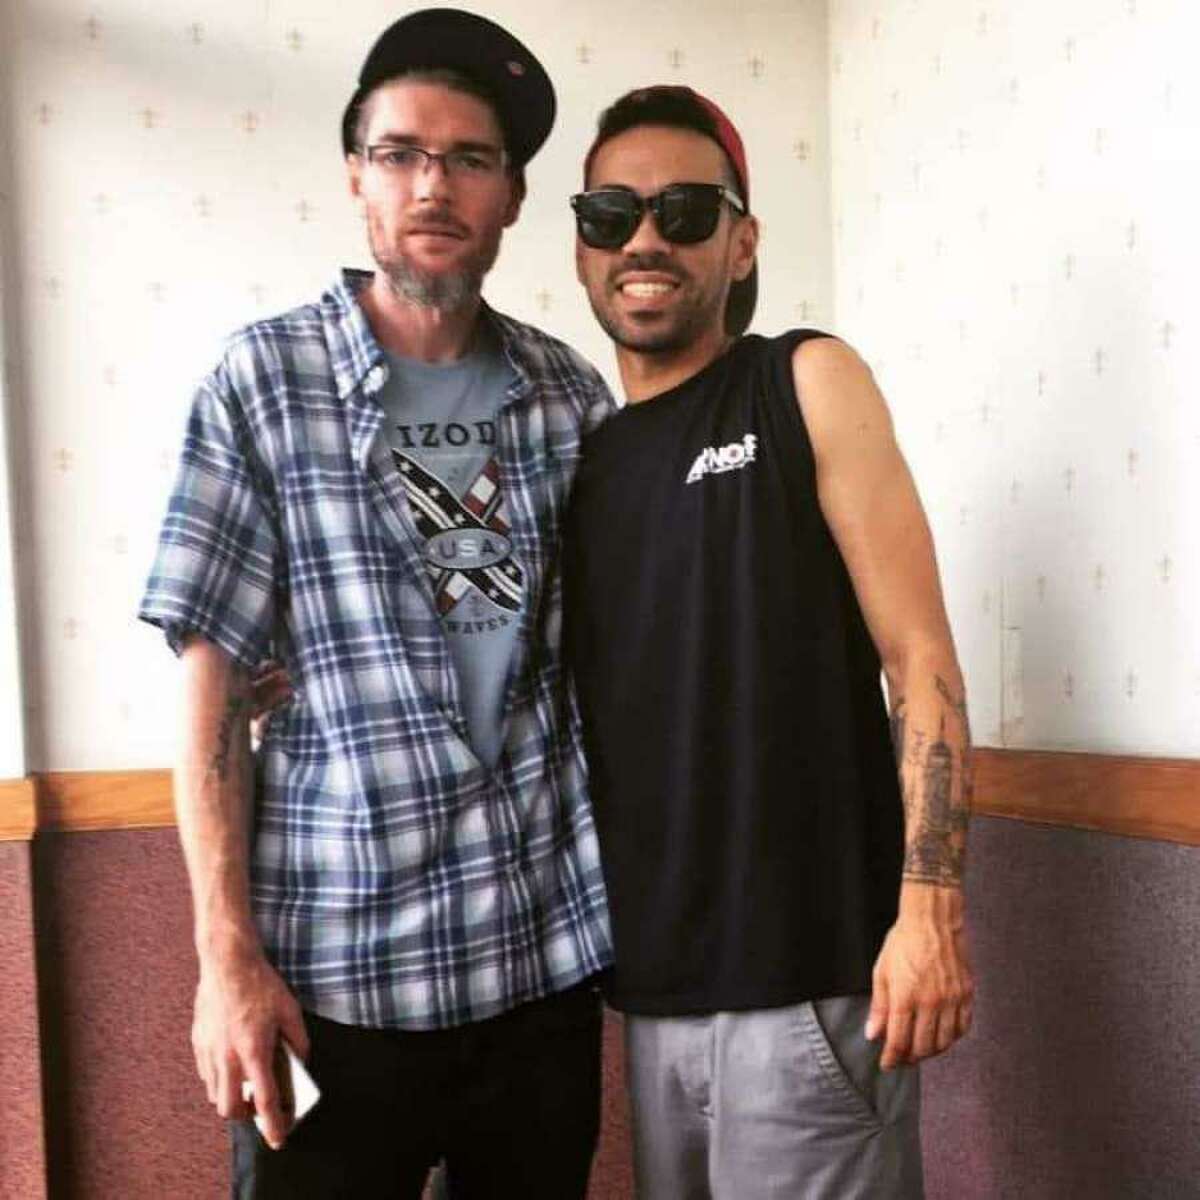 A photo of David Ramos, right, and Jason Hoffman, left, taken in August 2019